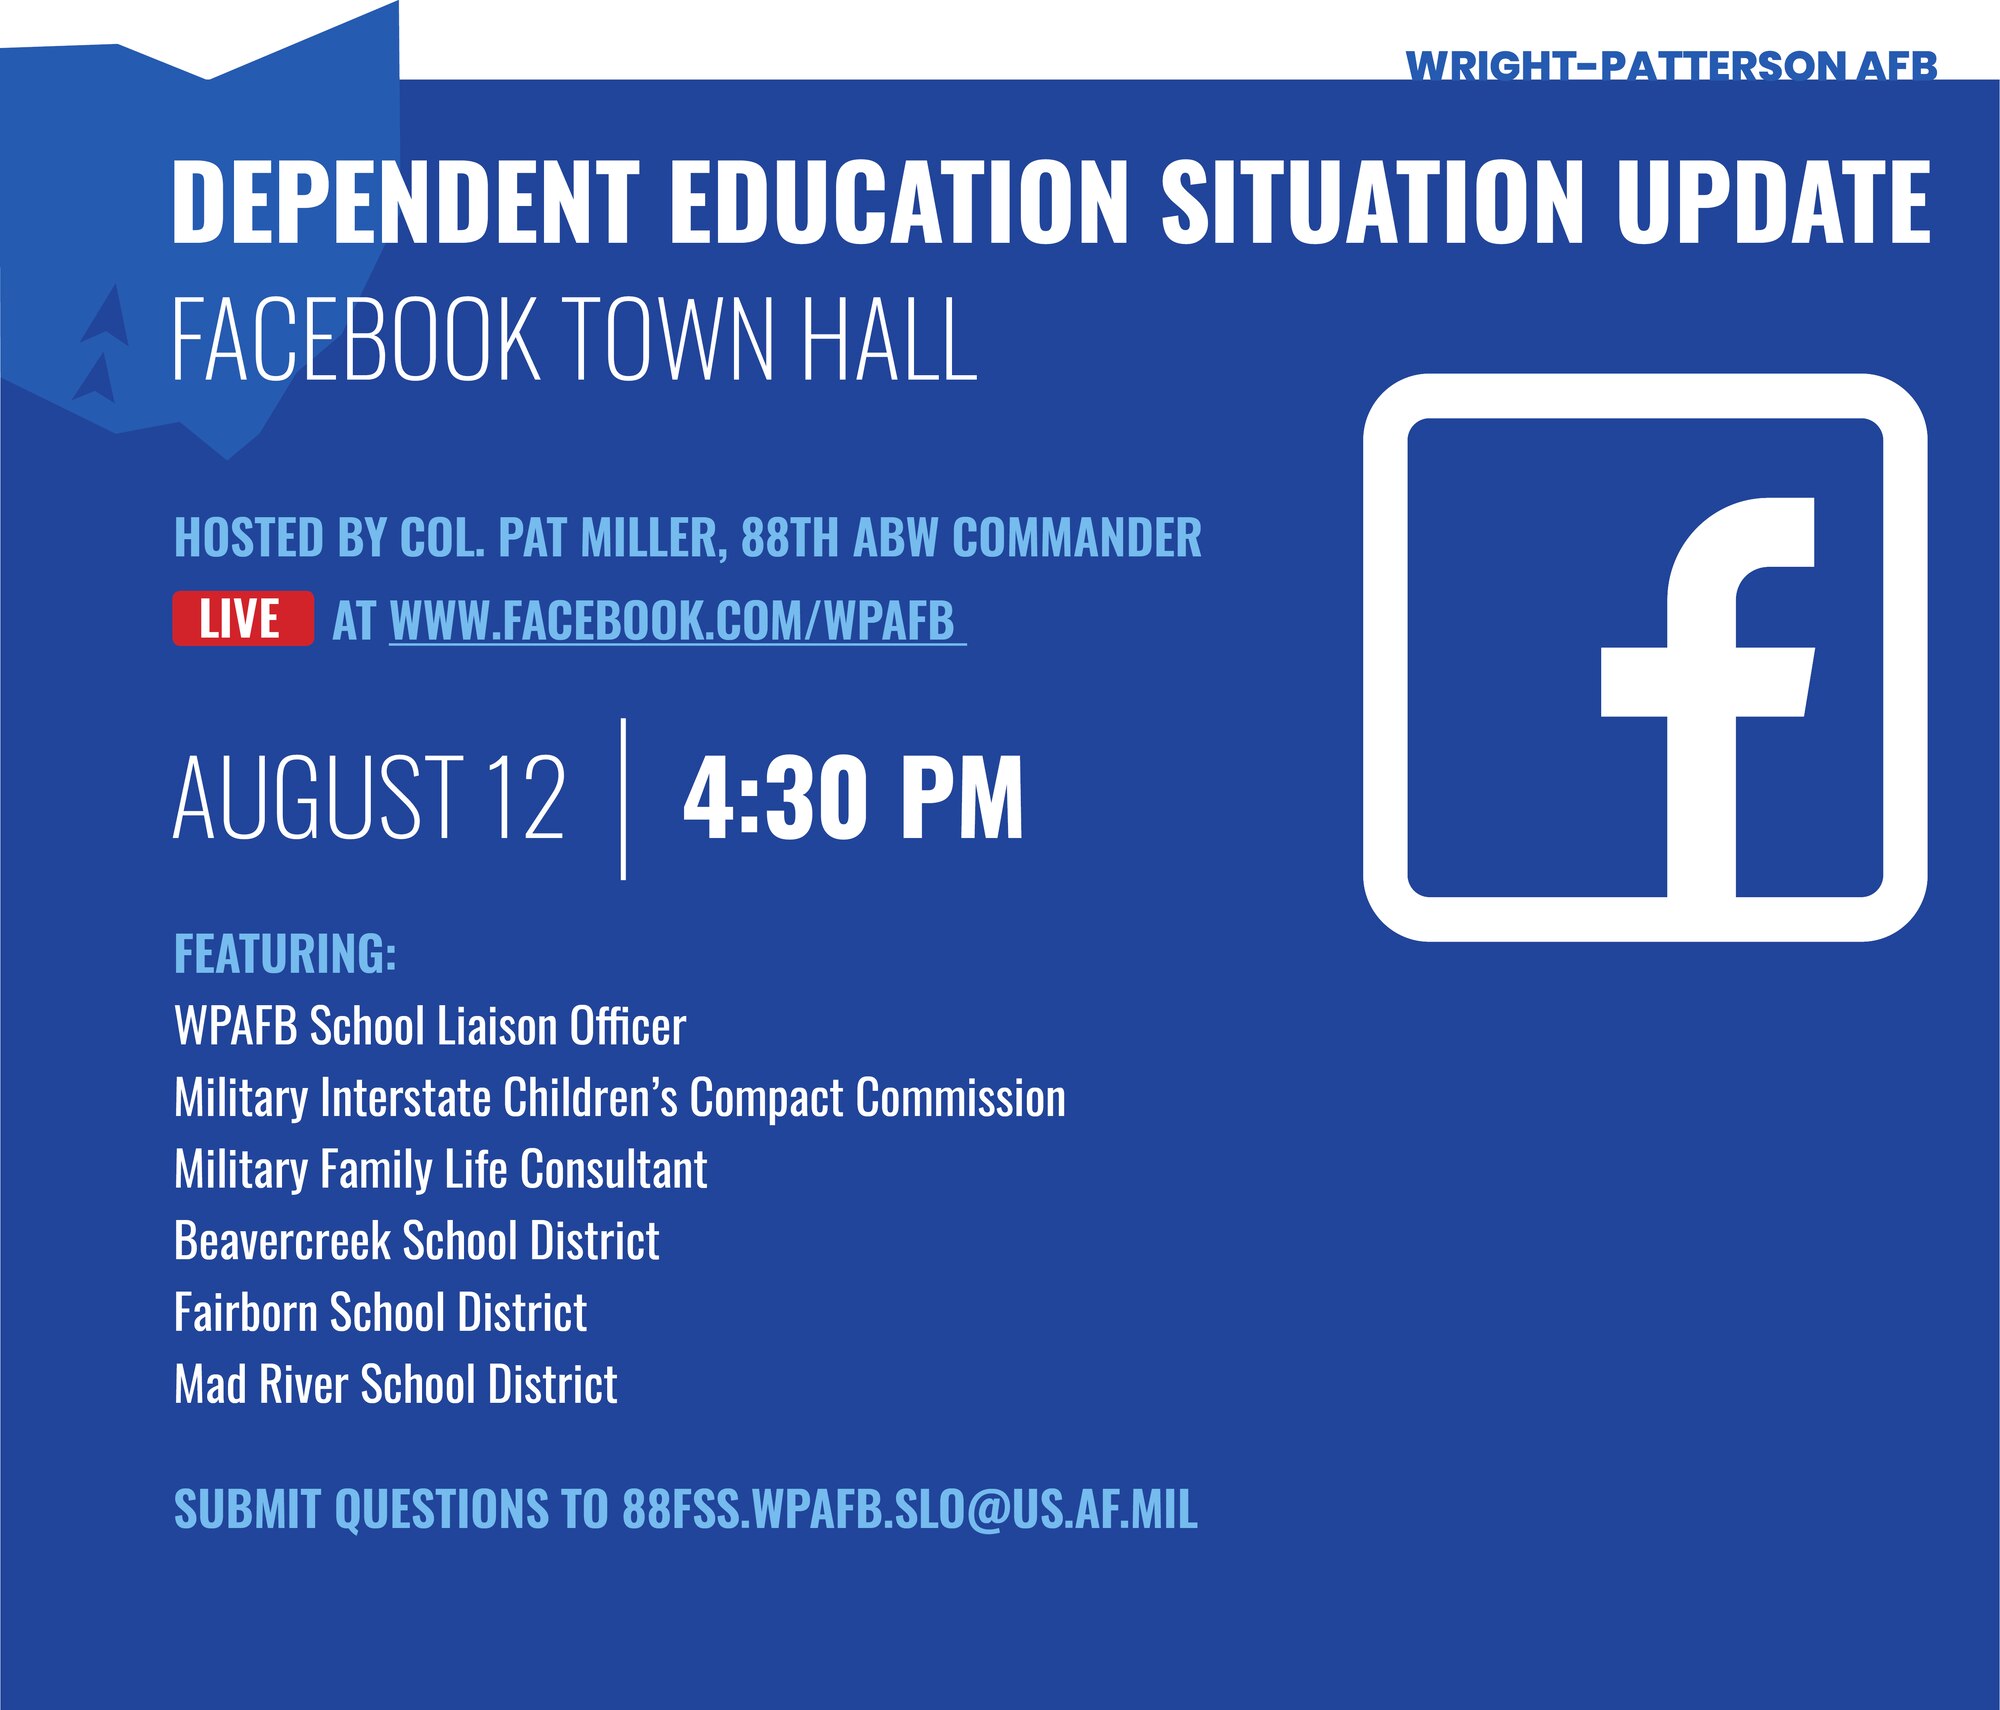 Col. Patrick Miller, the 88th Air Base Wing Commander, will hold a live dependent education situation update Facebook town hall on Wednesday, August 12 at 4:30 p.m. (U.S. Air Force graphic/Carrie Clauson)